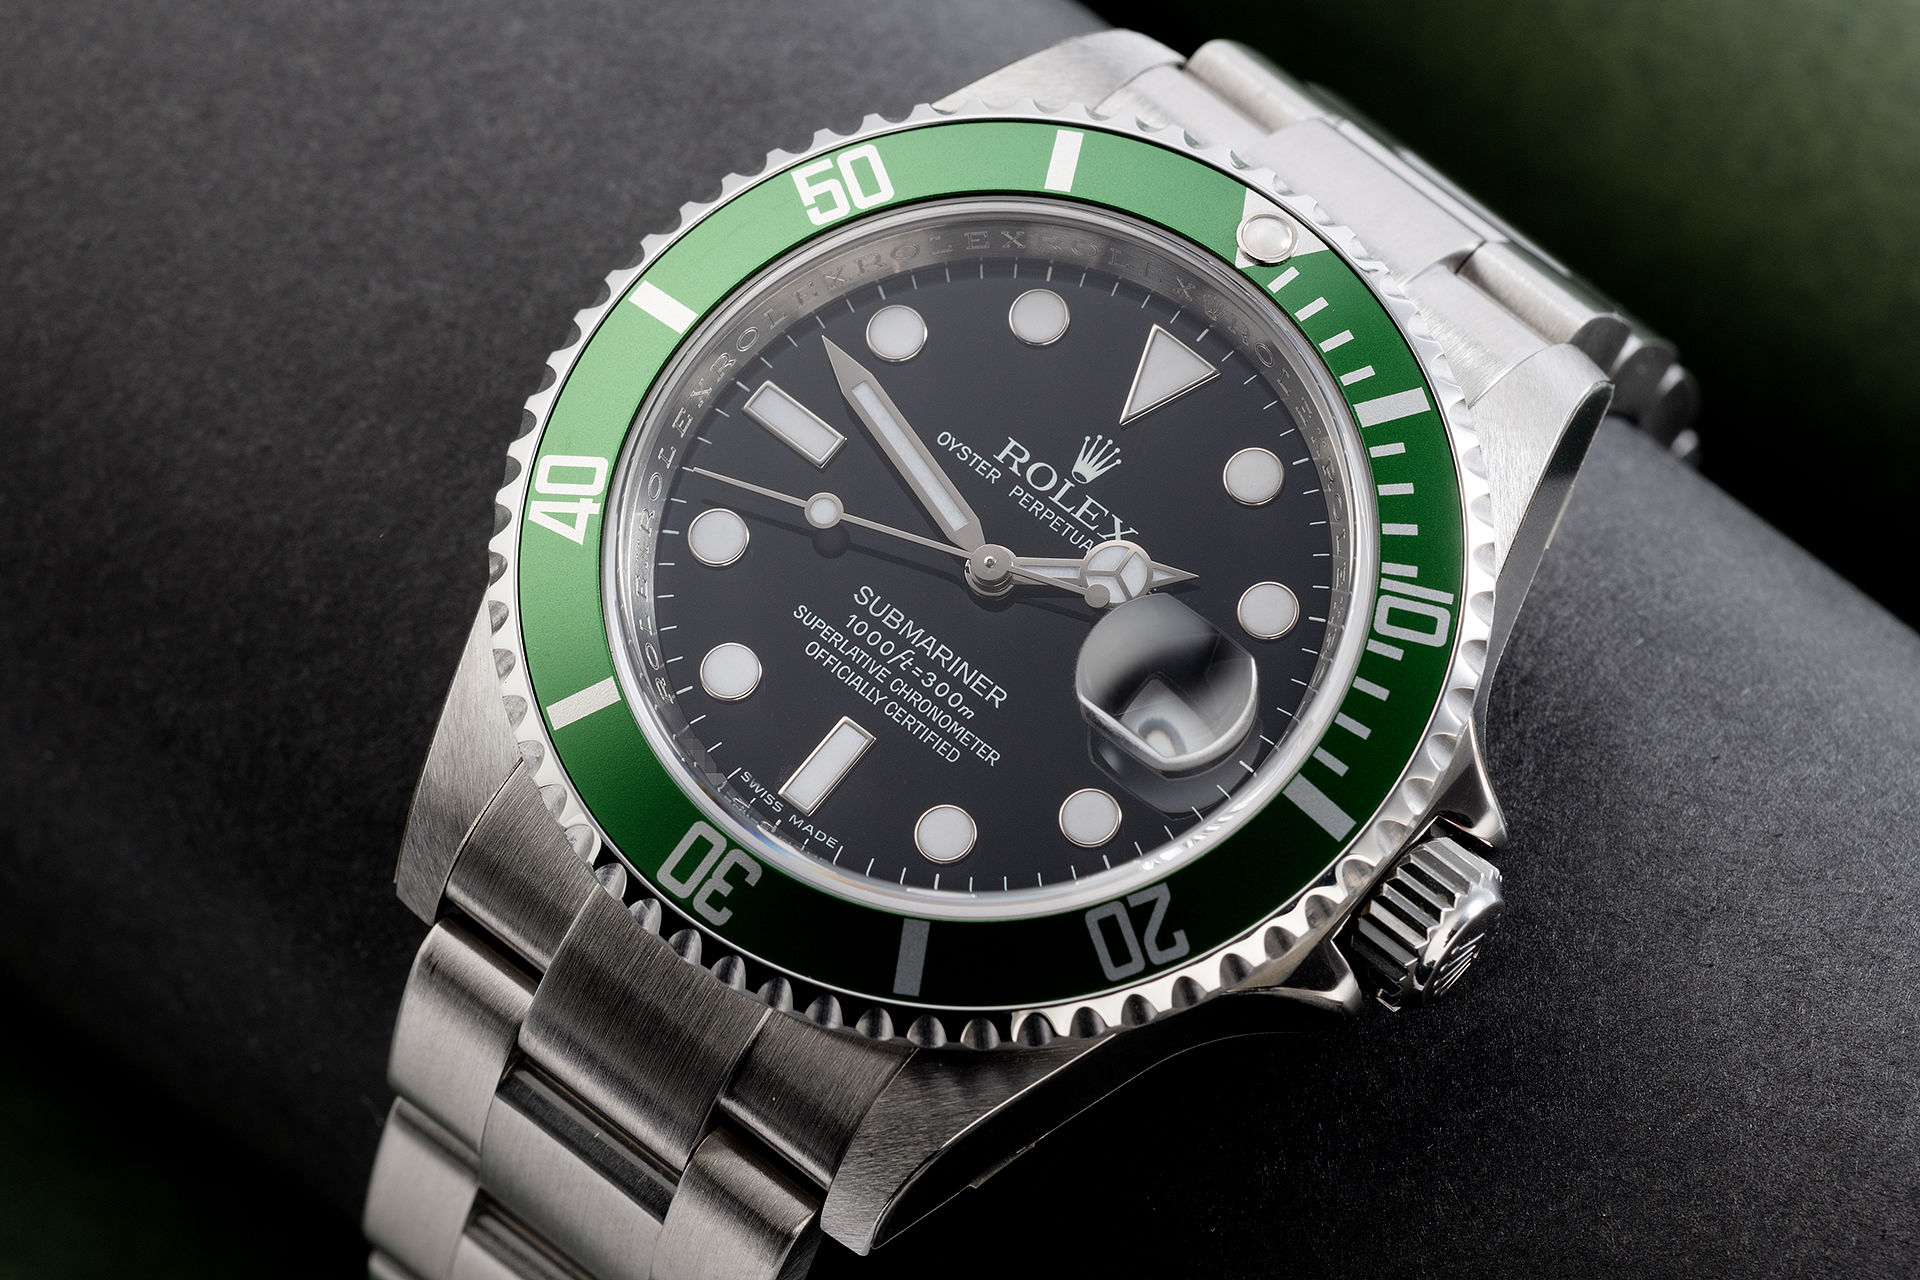 ref 16610LV | 50th Anniversary 'New Old Stock' | Rolex Submariner Date